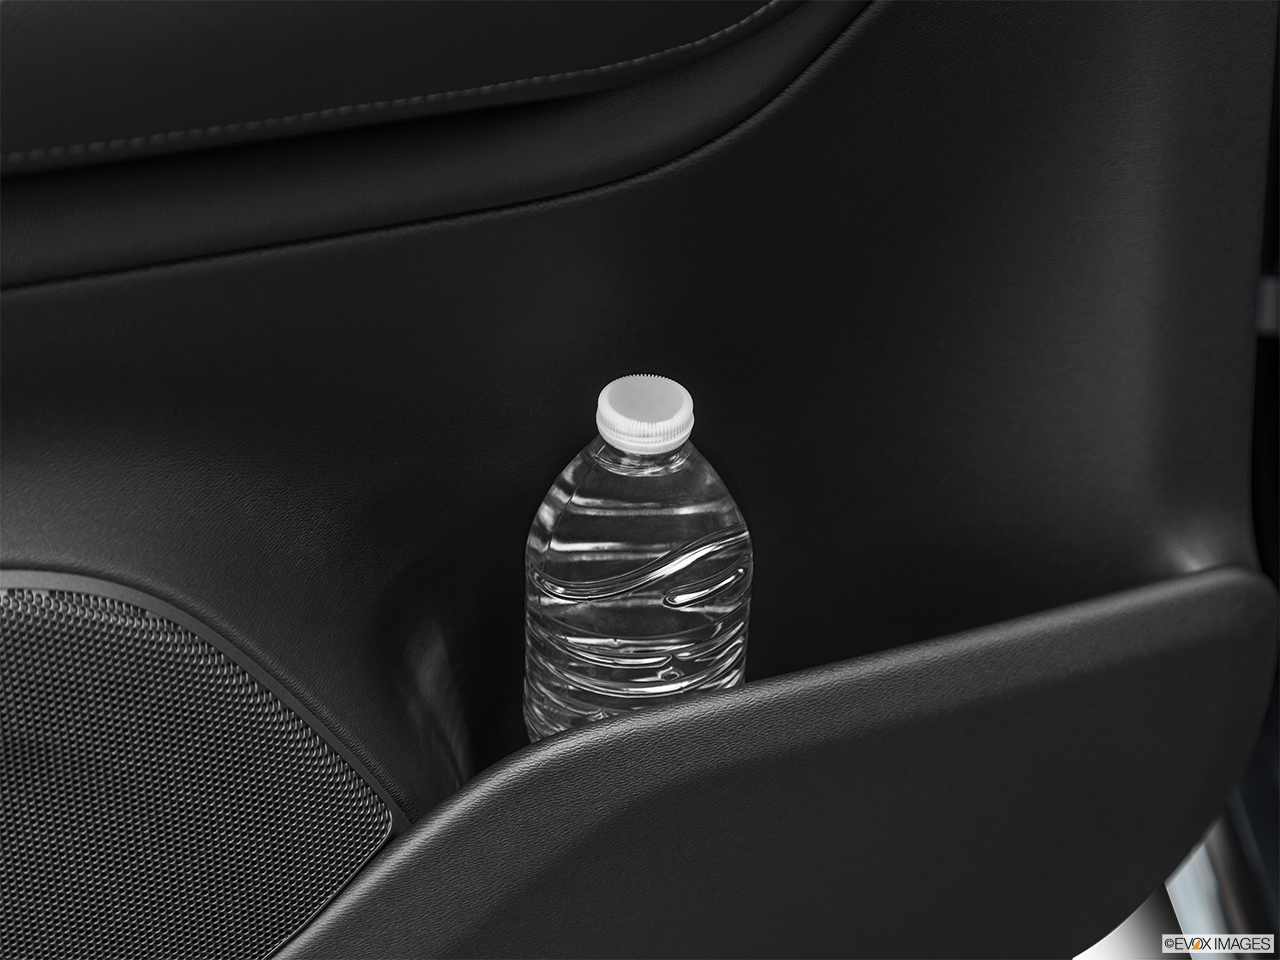 2020 Volvo XC90 T5 Momentum Second row side cup holder with coffee prop, or second row door cup holder with water bottle. 